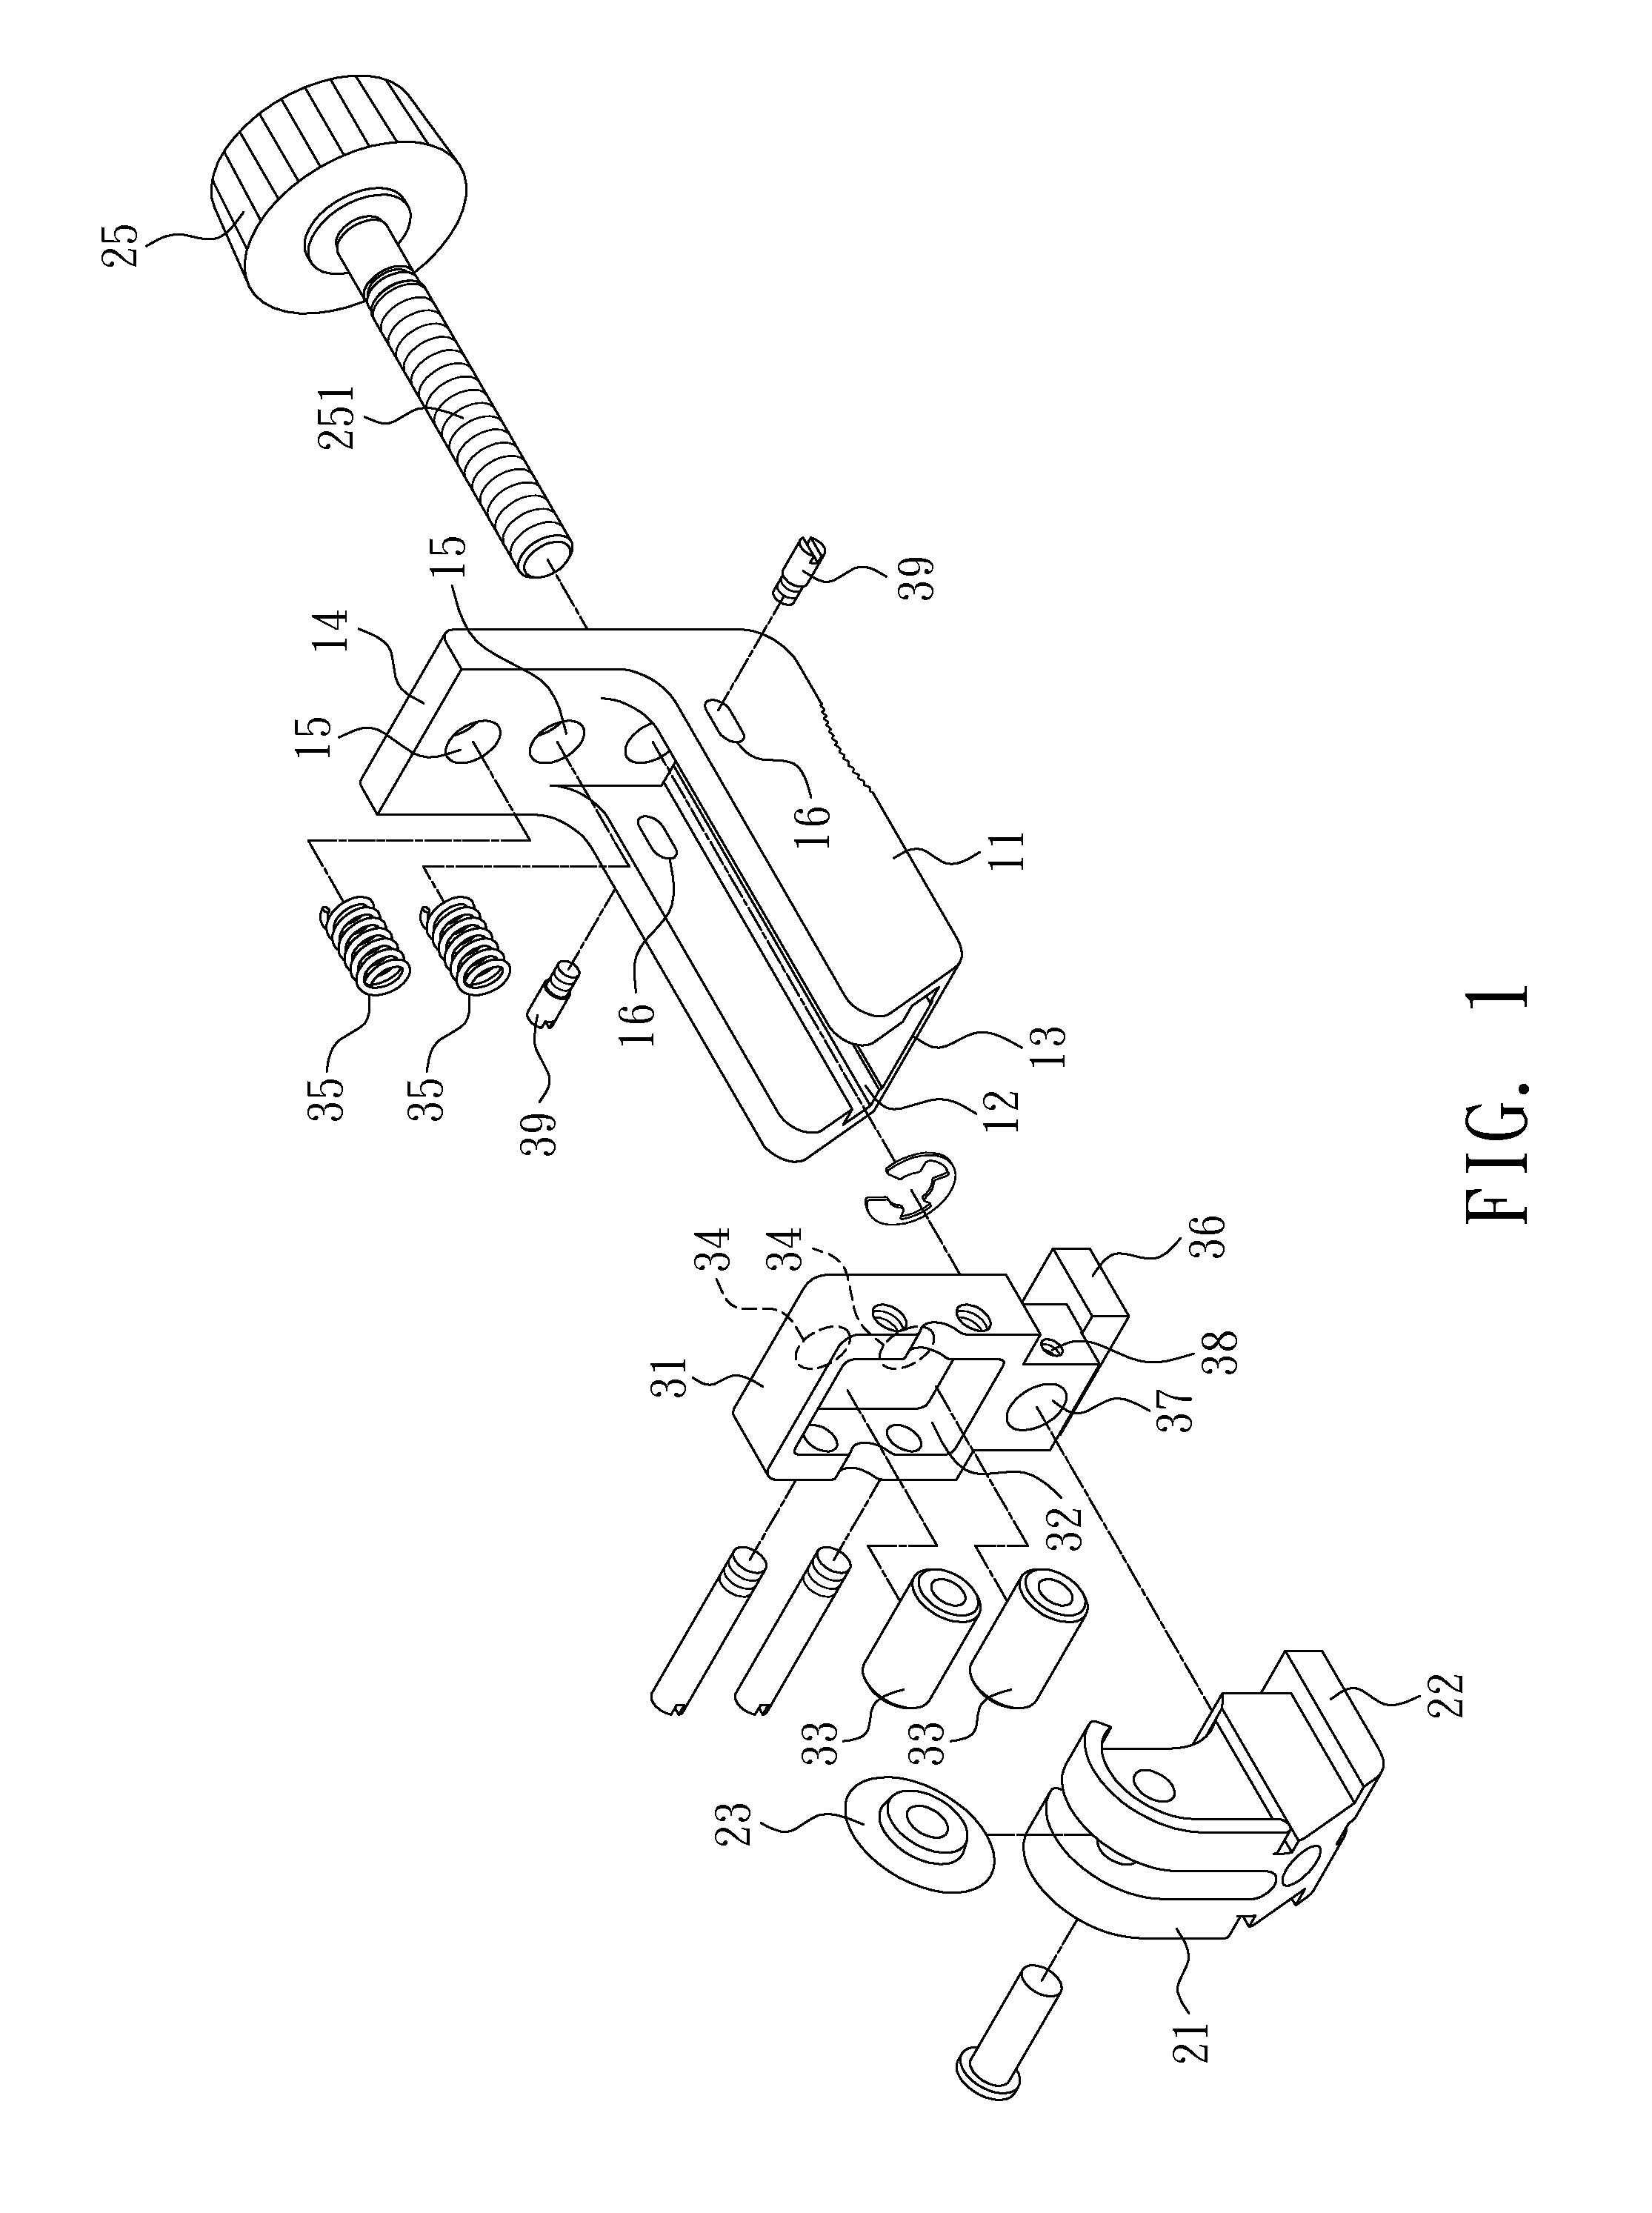 Structure of a cutting tool